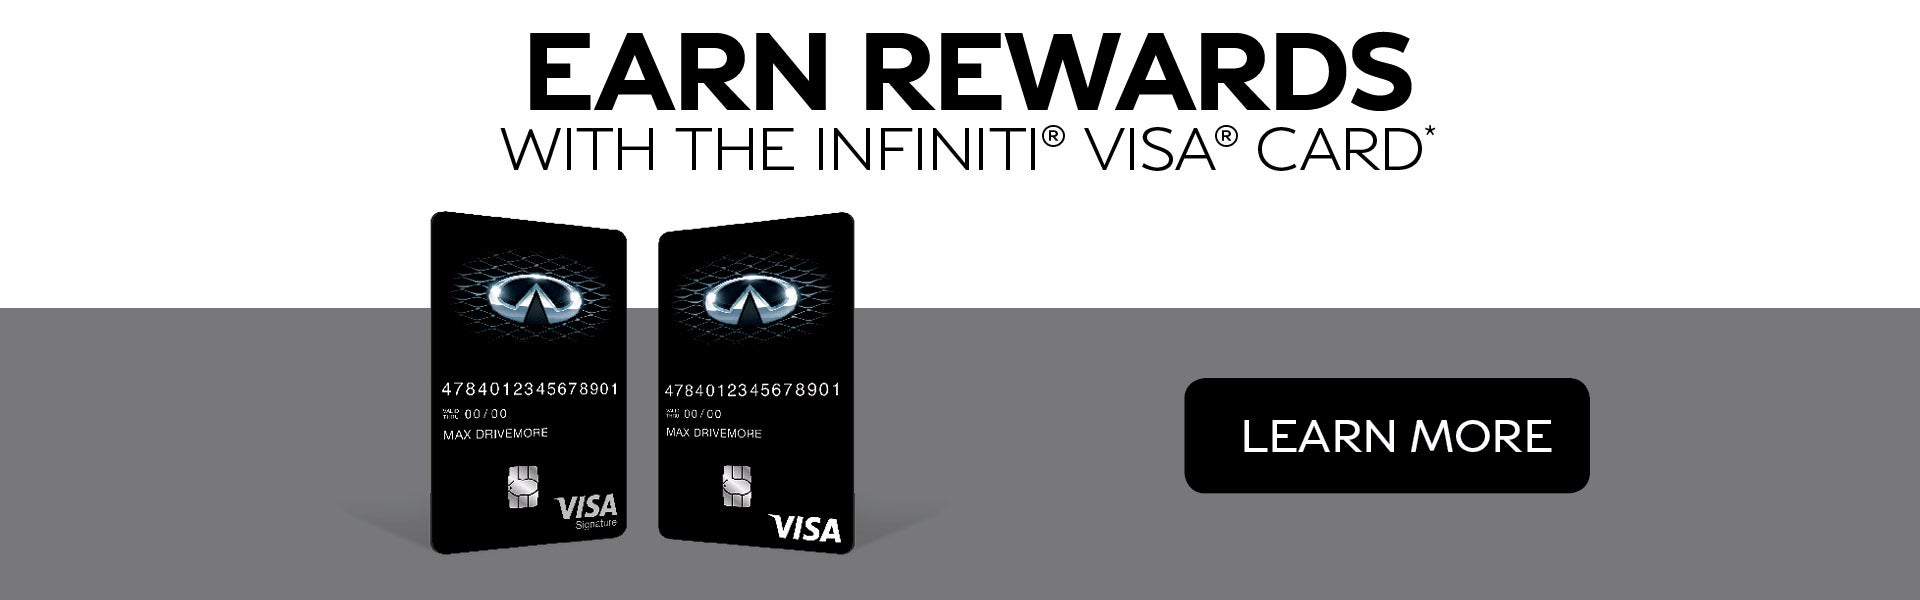 earn rewards with the INFINITI visa card*. learn more.